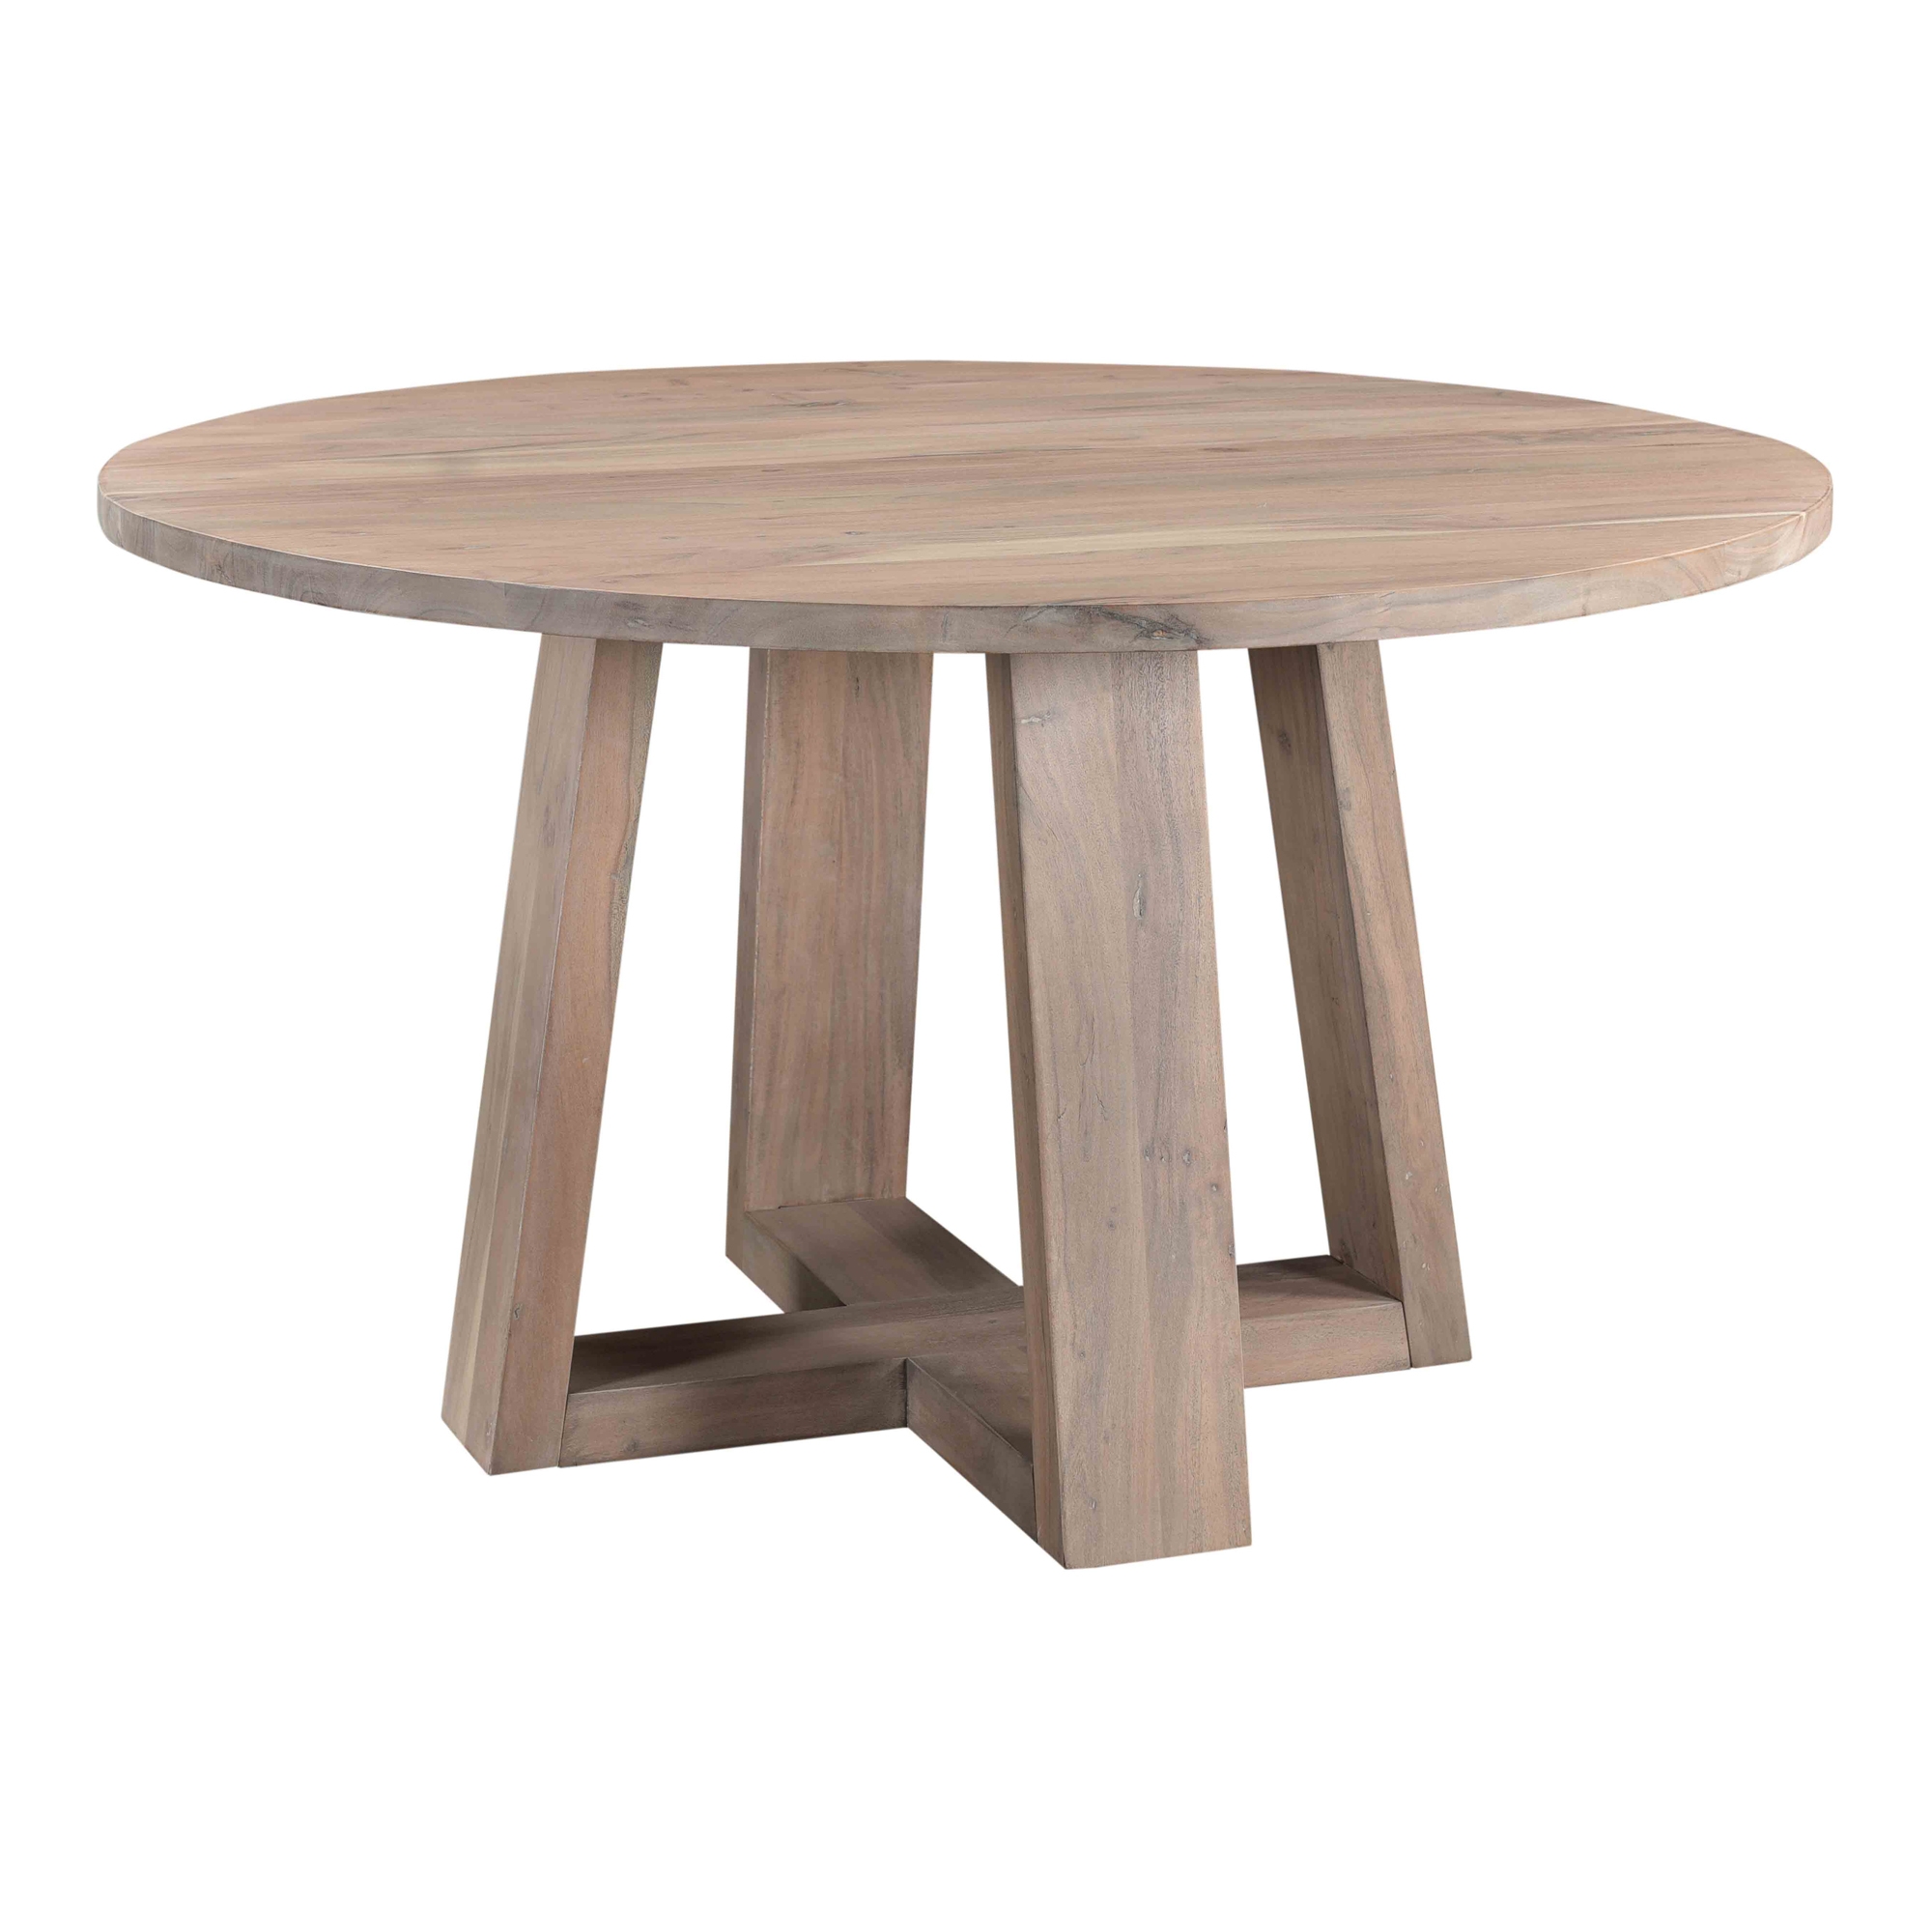 Tanya Round Dining Table - Image 1